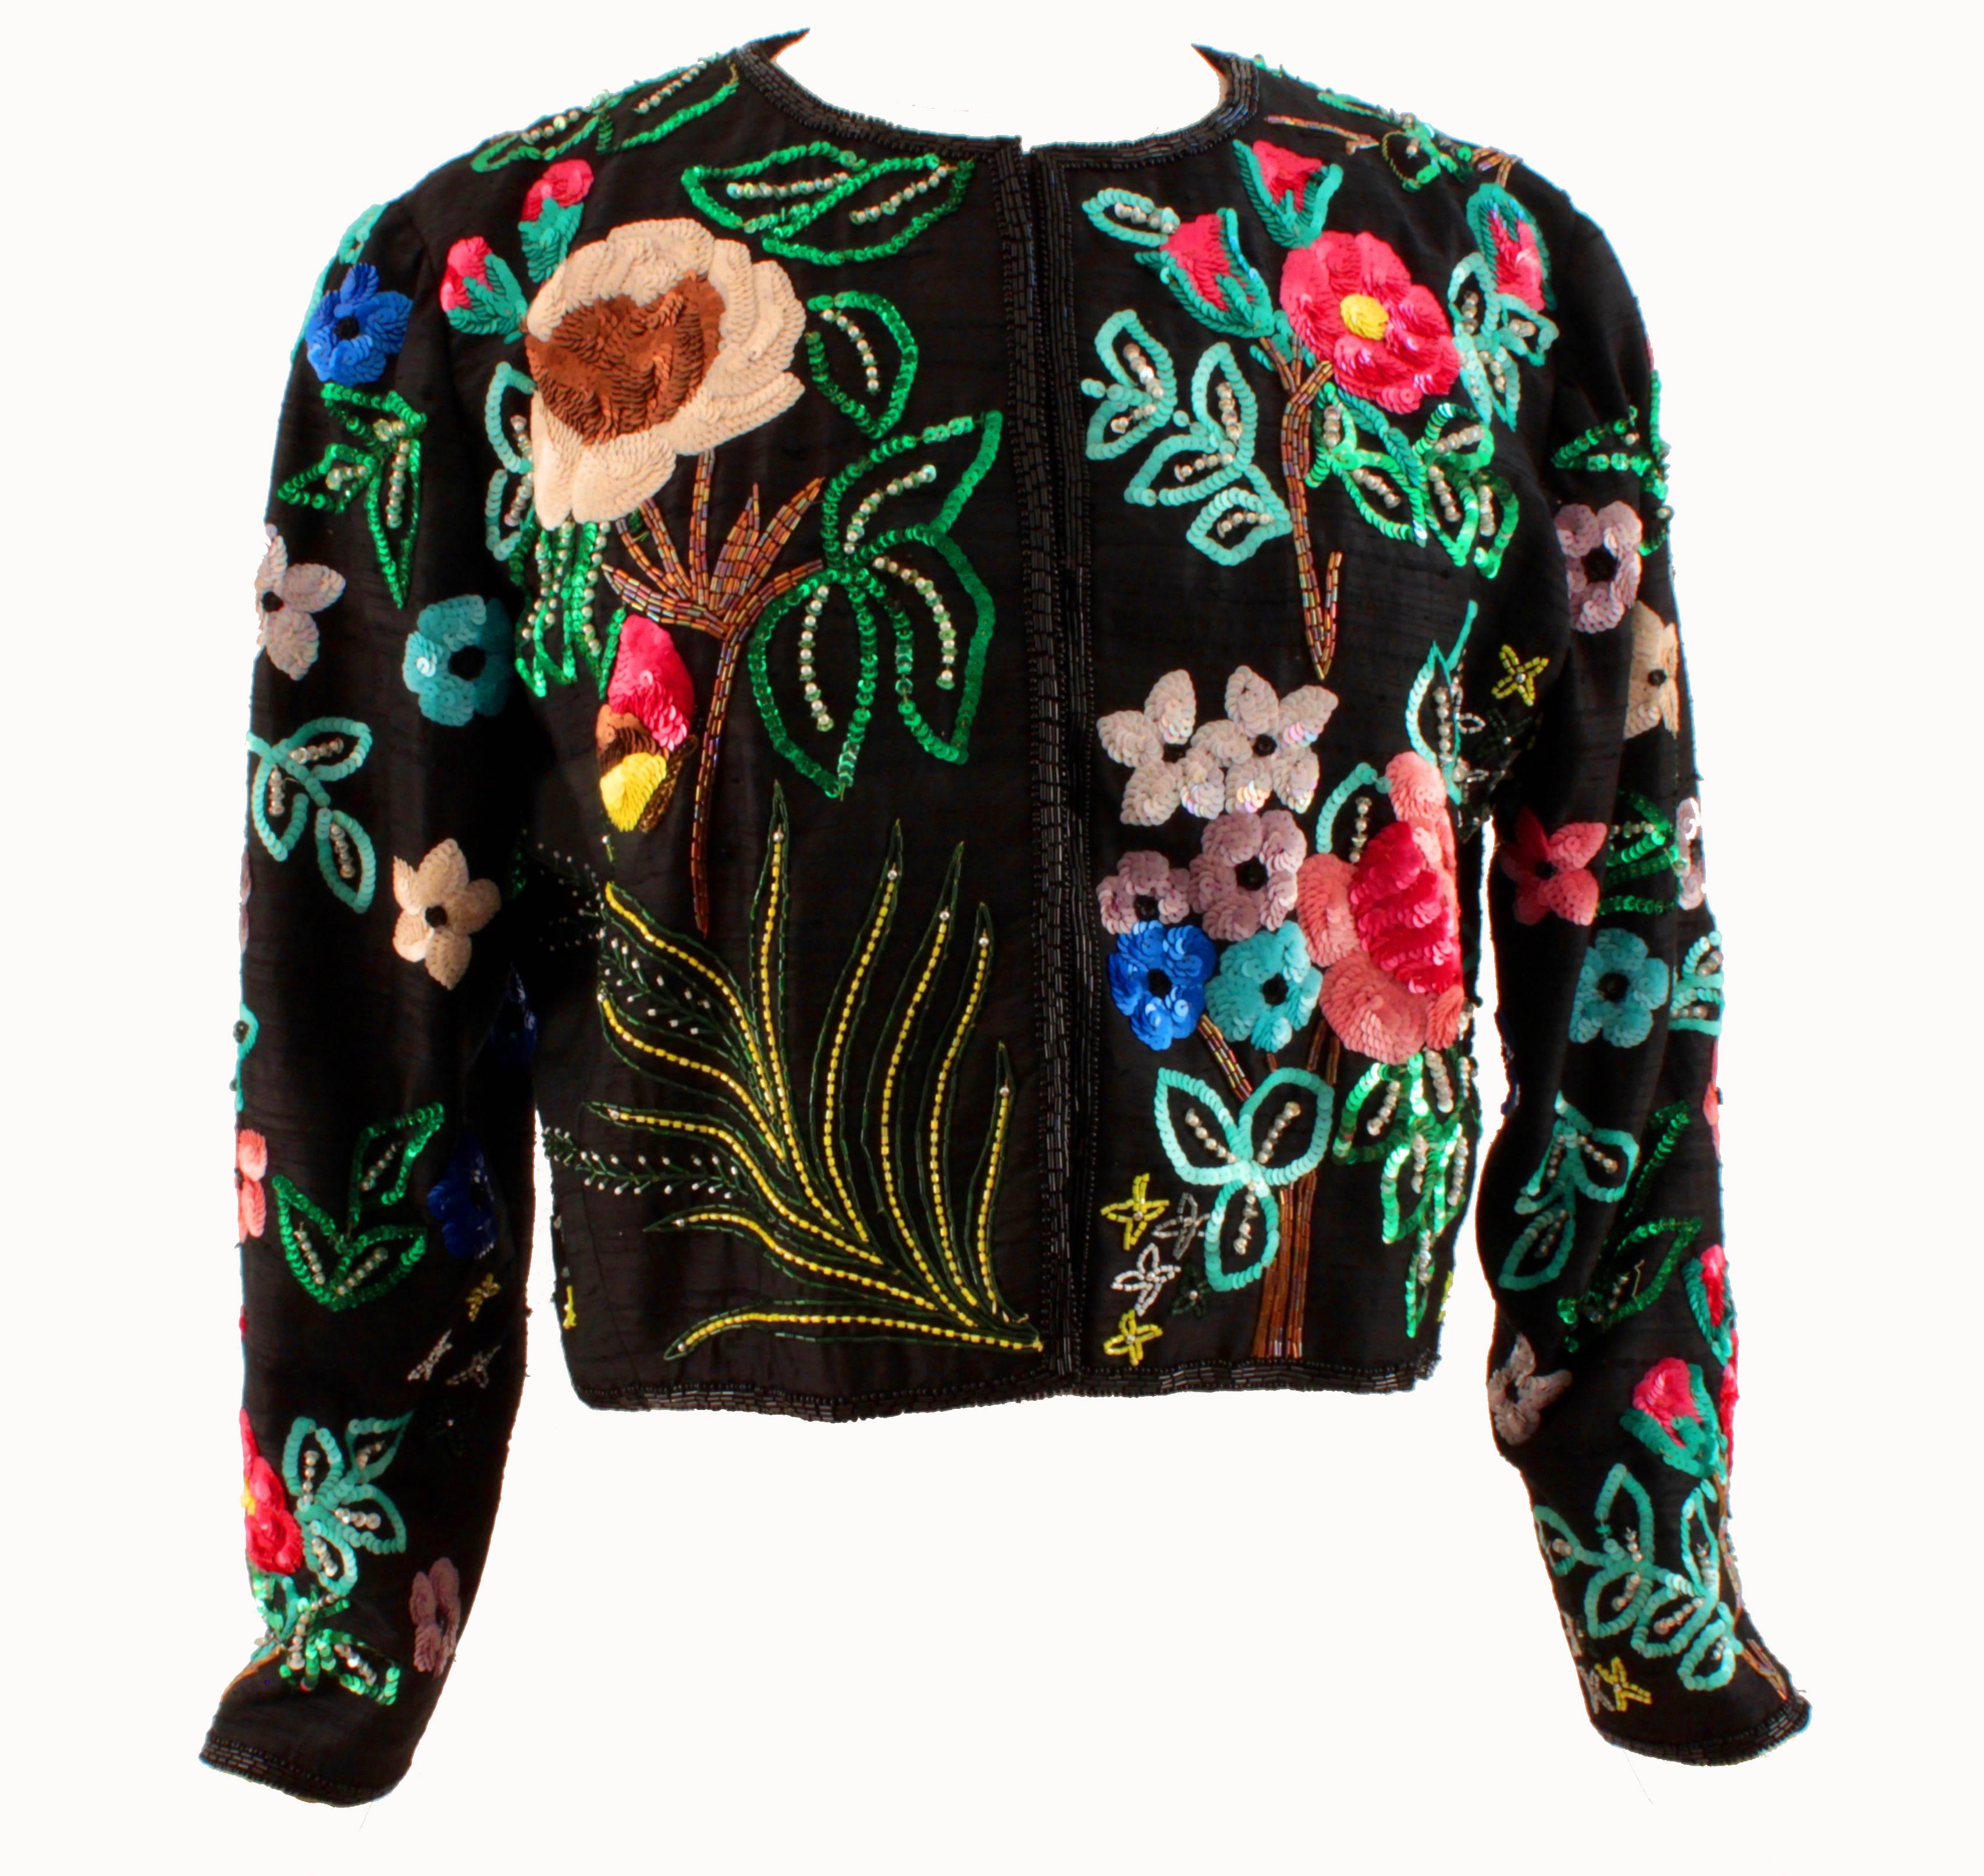 Here's a unique bolero jacket from Jeanette Kastenberg for St Martin, likely made in the 1980s.  Made from black silk fabric, it features bold floral patterns throughout in bright colors. 

Fully-lined in black silk and fastens with hidden snaps. 